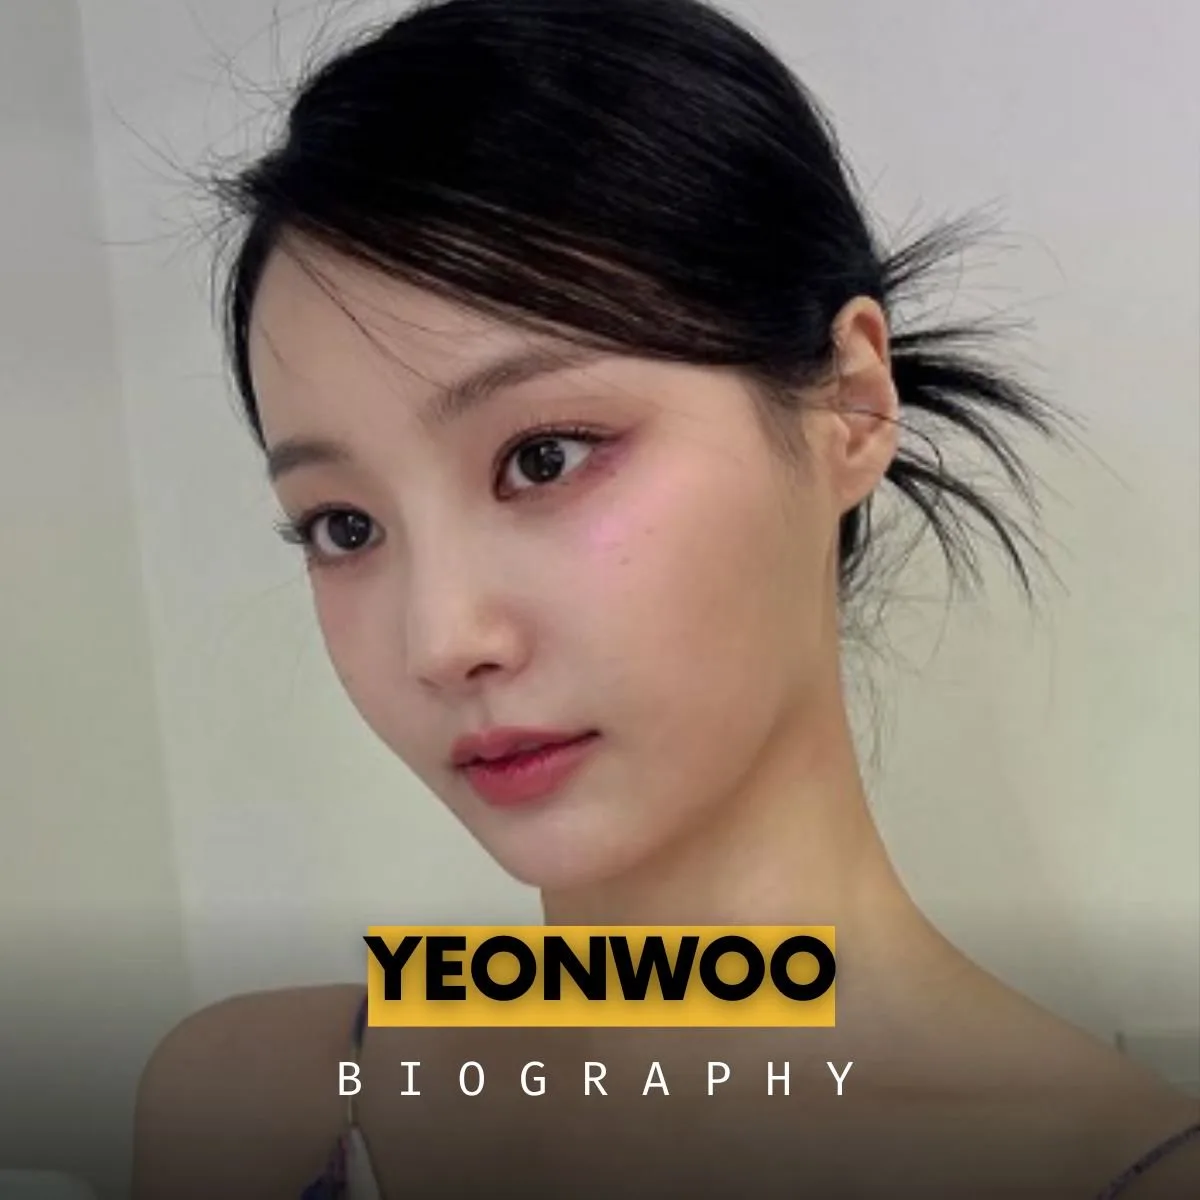 Picture of Yeonwoo from Instagram